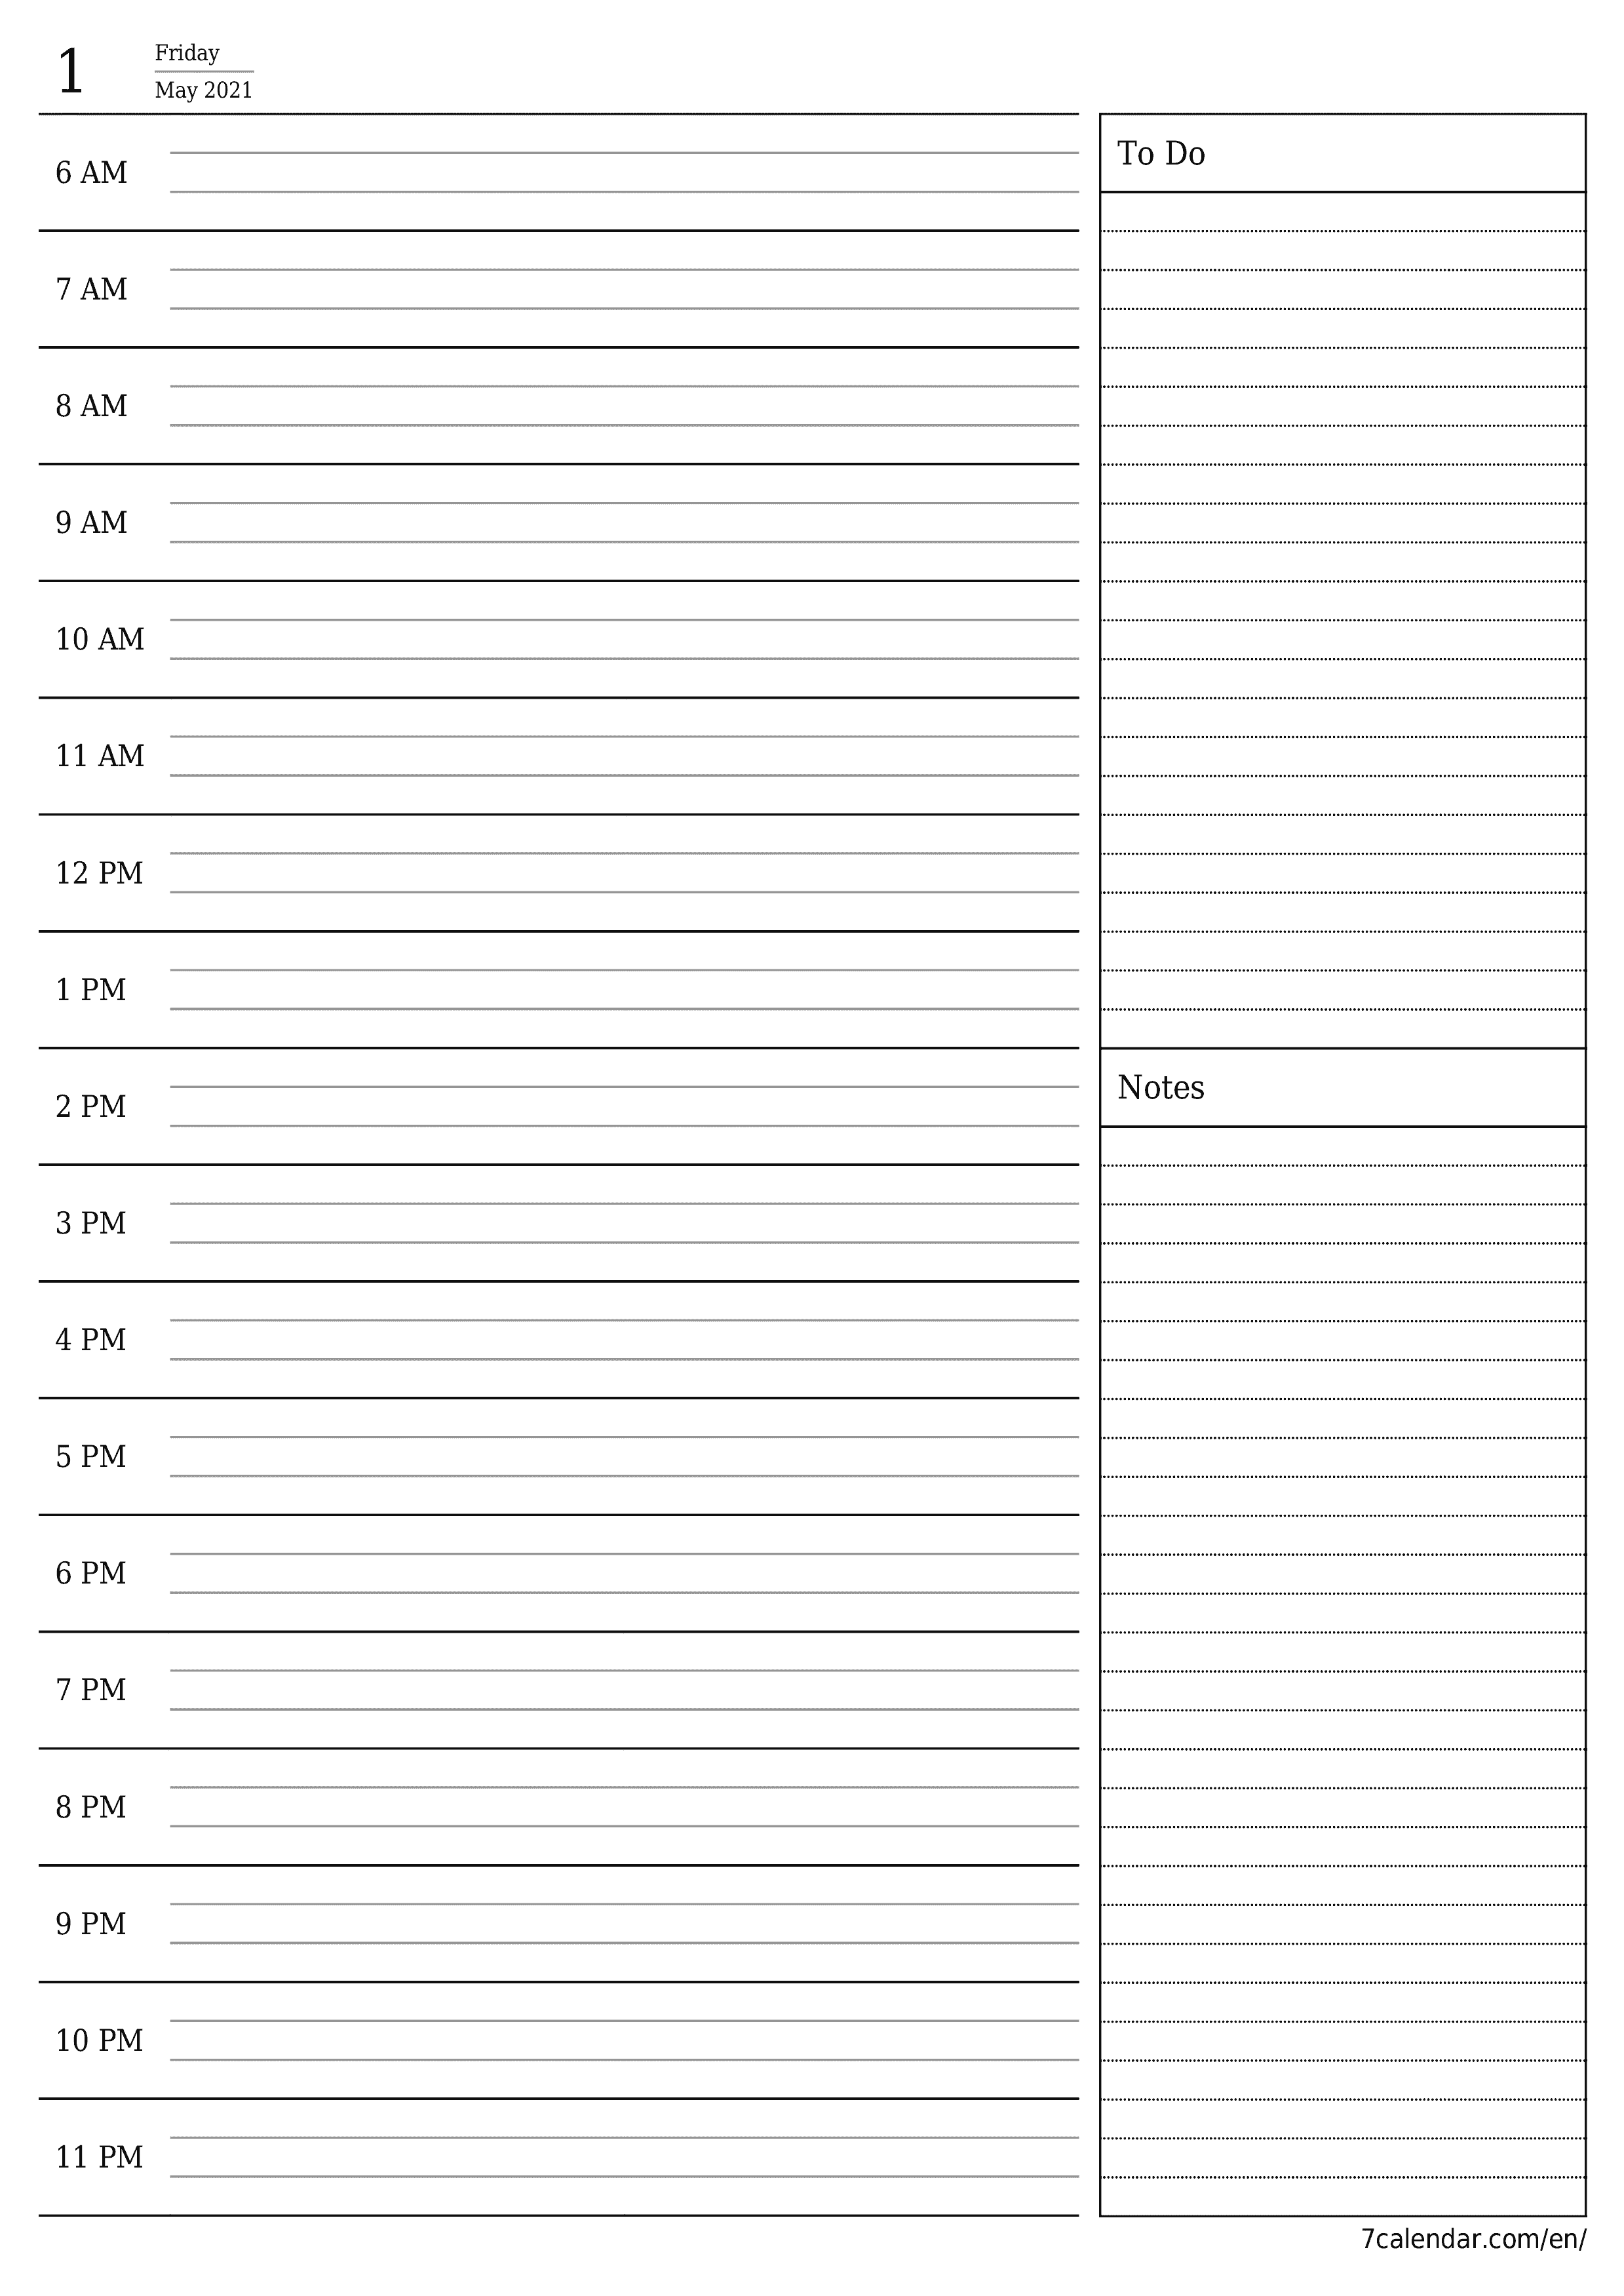 Blank daily calendar planner for day May 2021 with notes, save and print to PDF PNG English - 7calendar.com